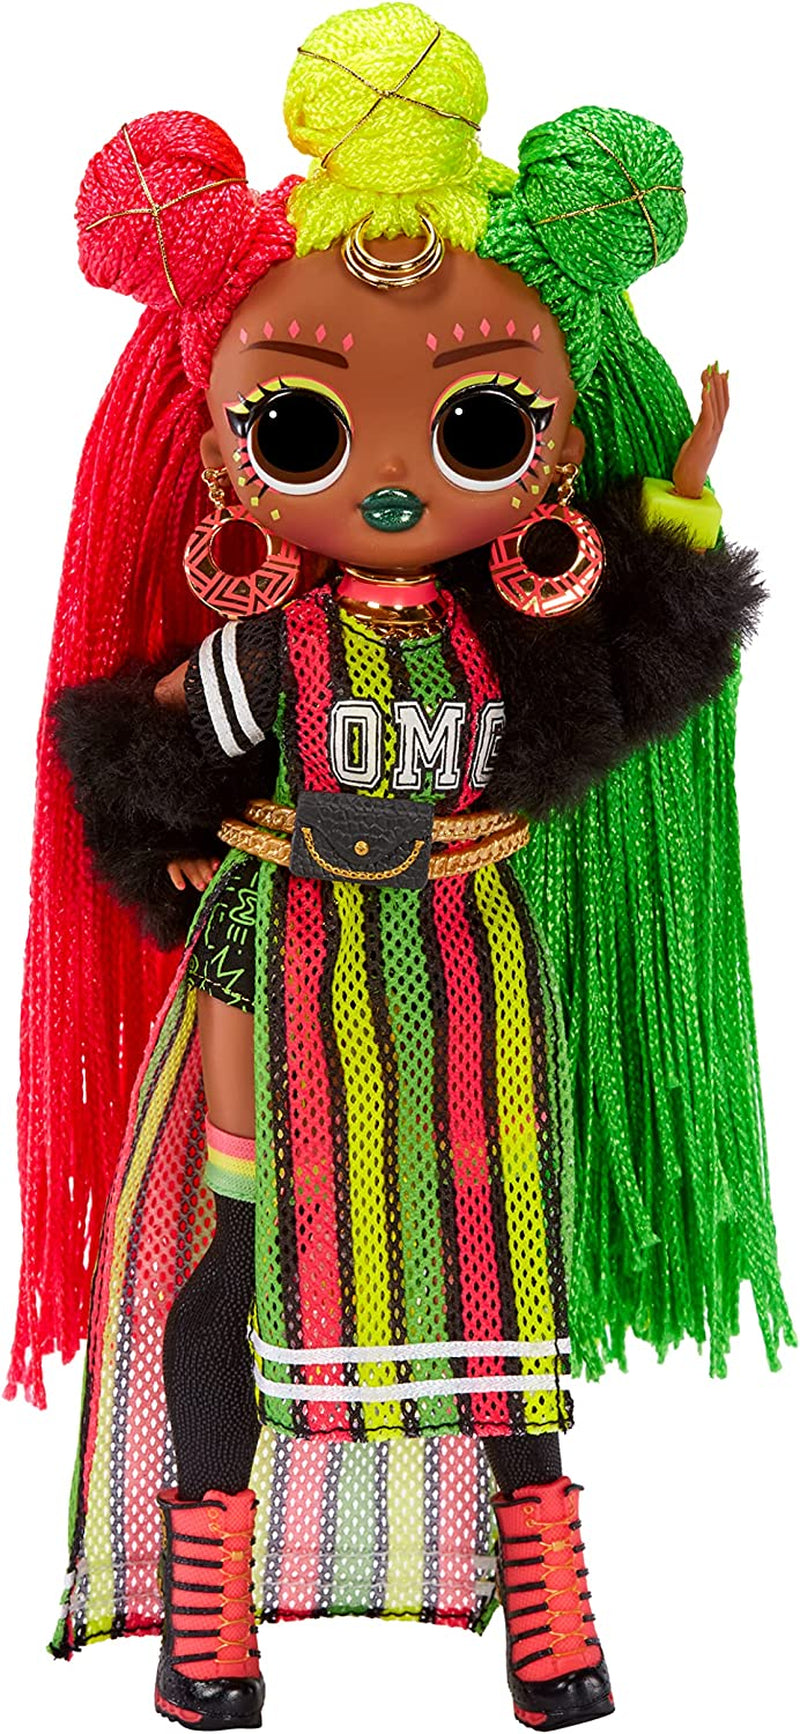 LOL Surprise OMG Queens Sways Fashion Doll with 20 Surprises Including Outfit and Accessories for Fashion Toy Girls Ages 3 and Up, 10-Inch Doll